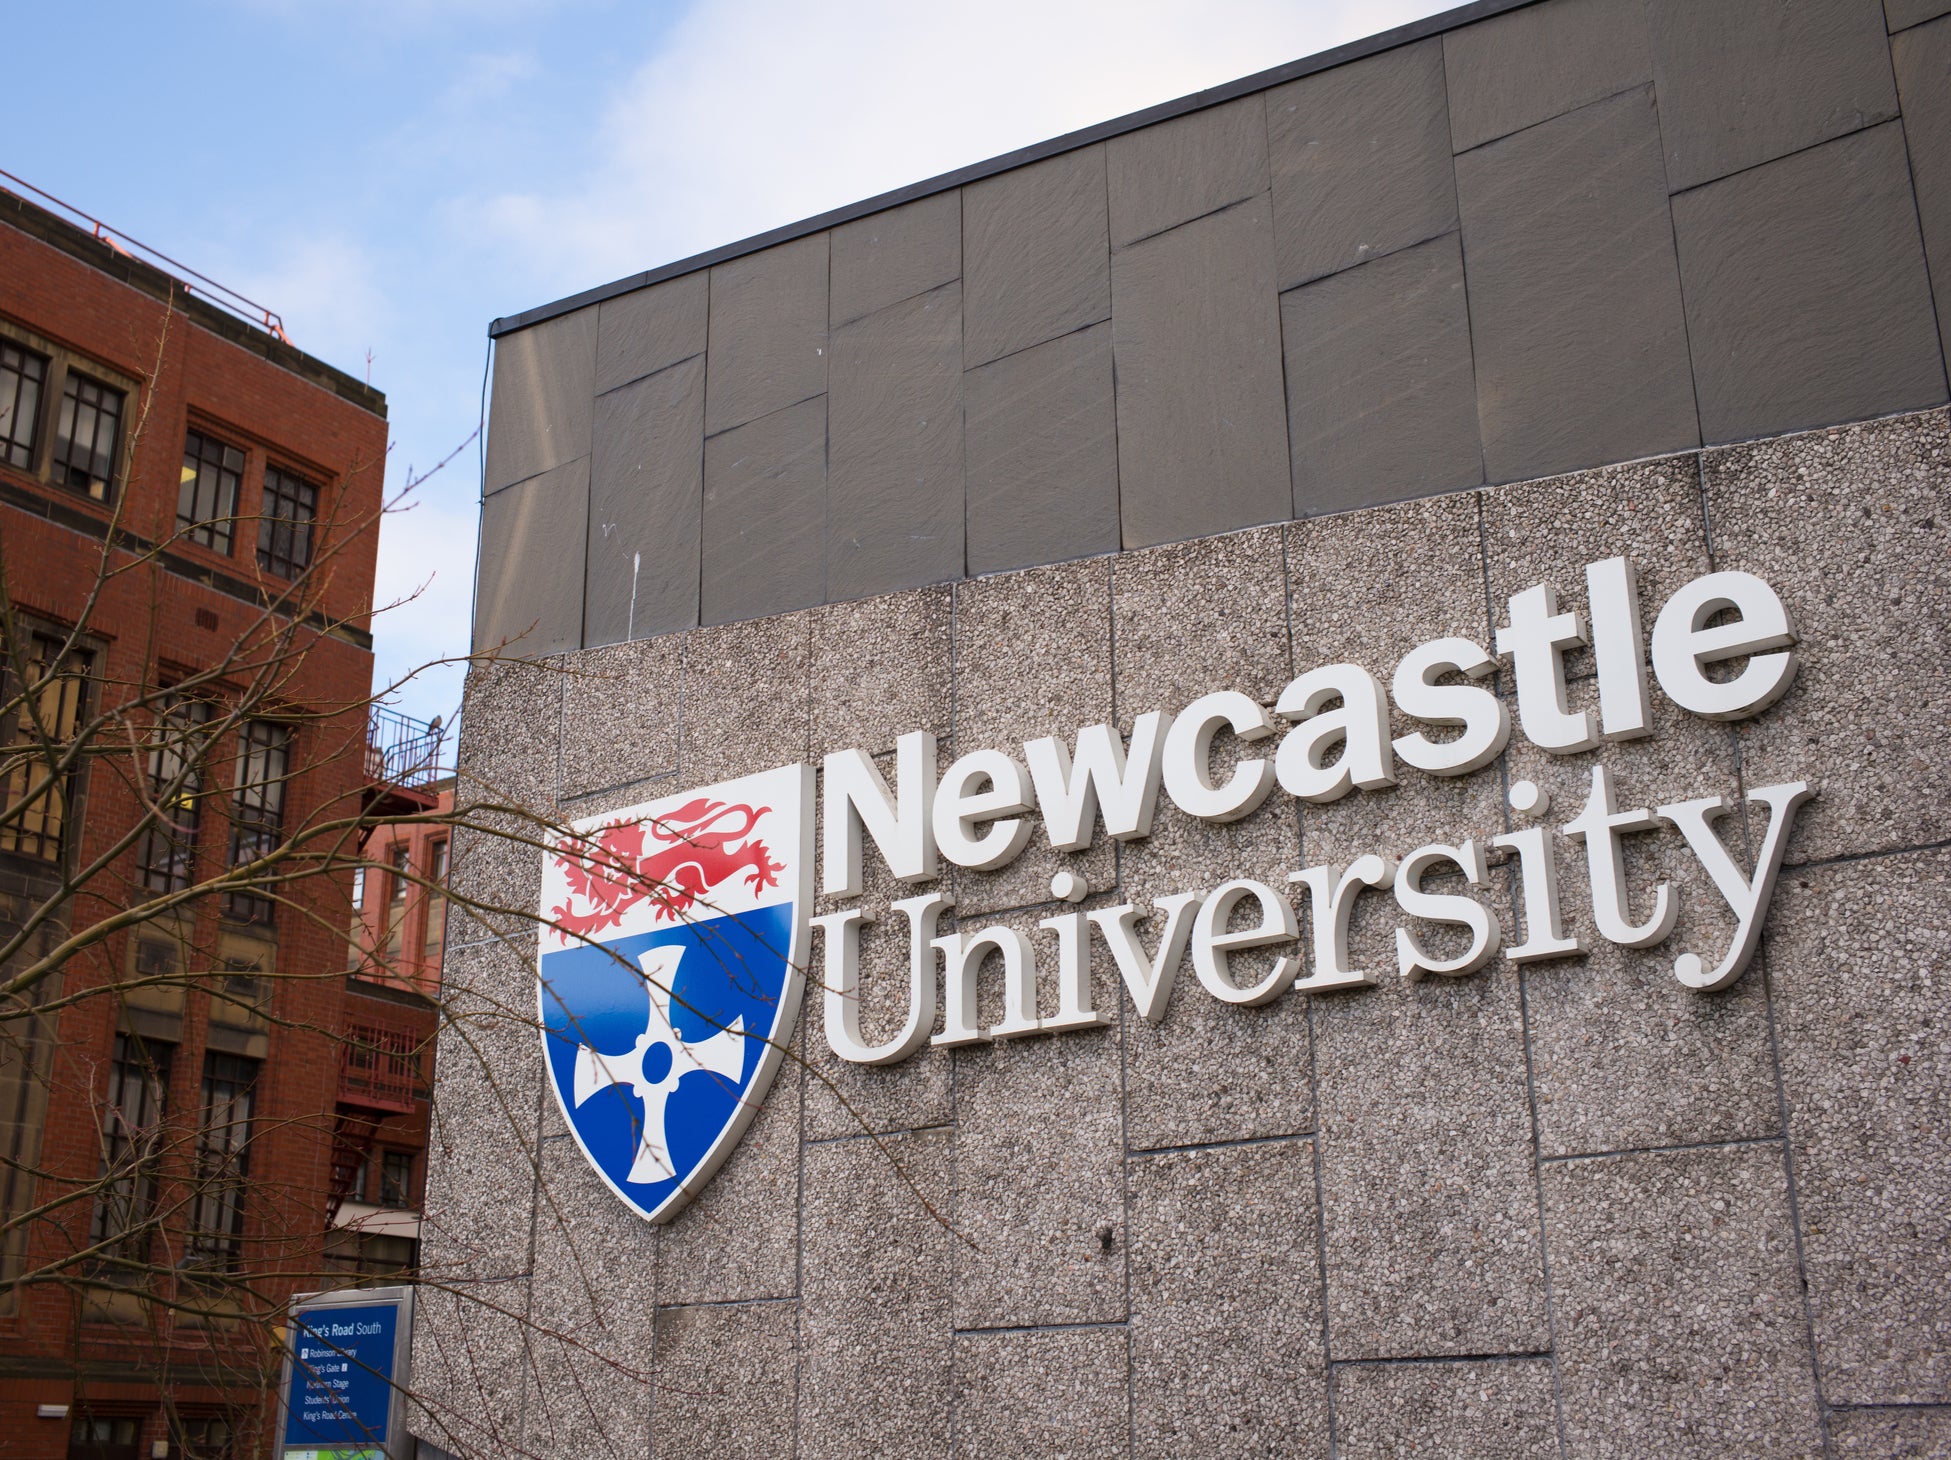 Newcastle University has said that the ‘yellow card’ warning over the incident has been removed following an investigation